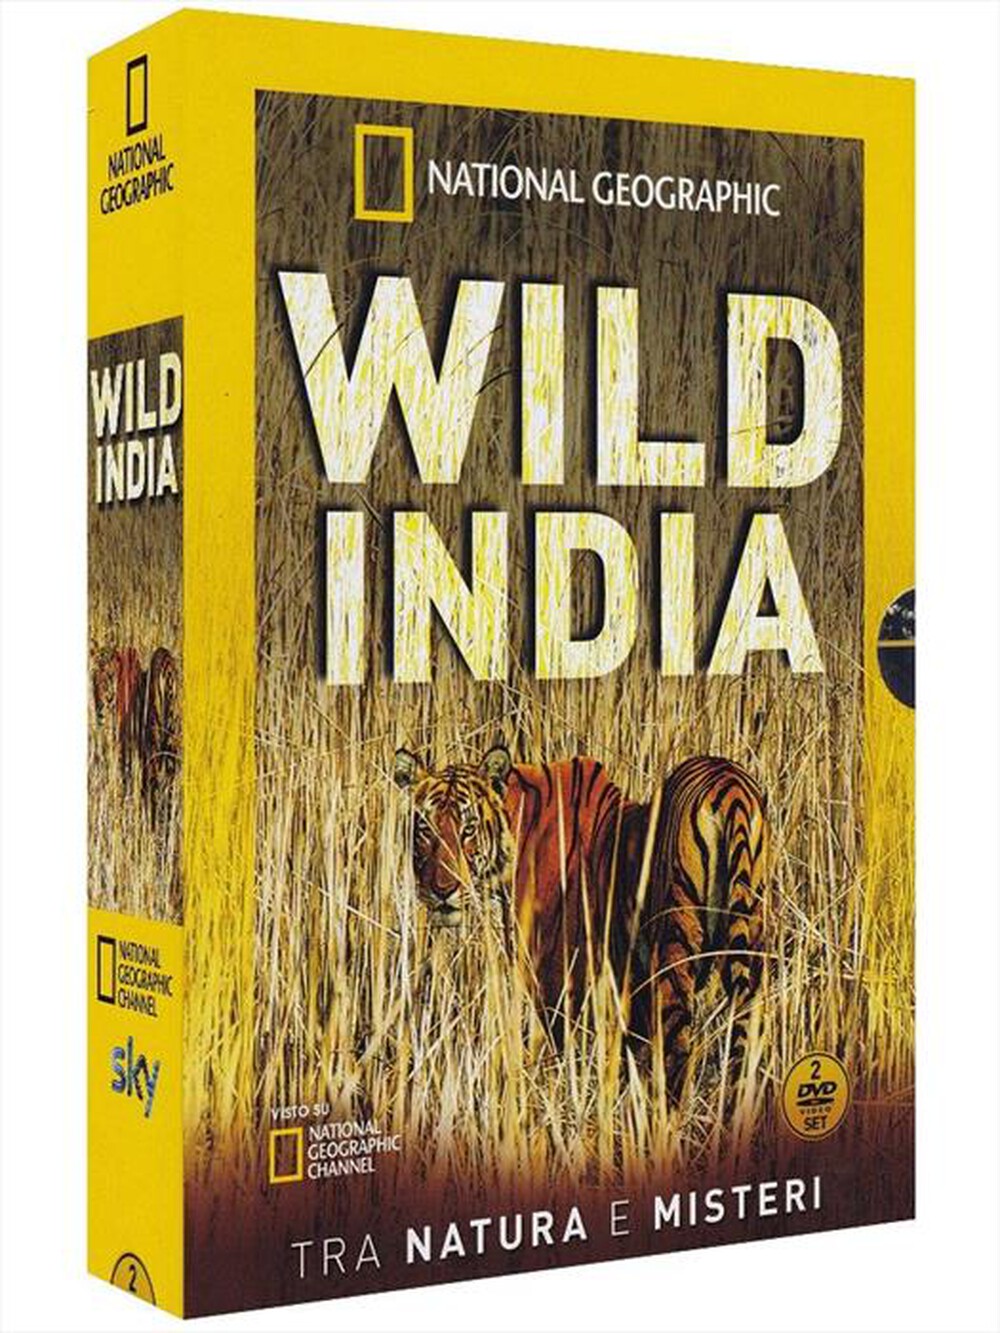 "NATIONAL GEOGRAPHIC - Wild India (2 Dvd)"